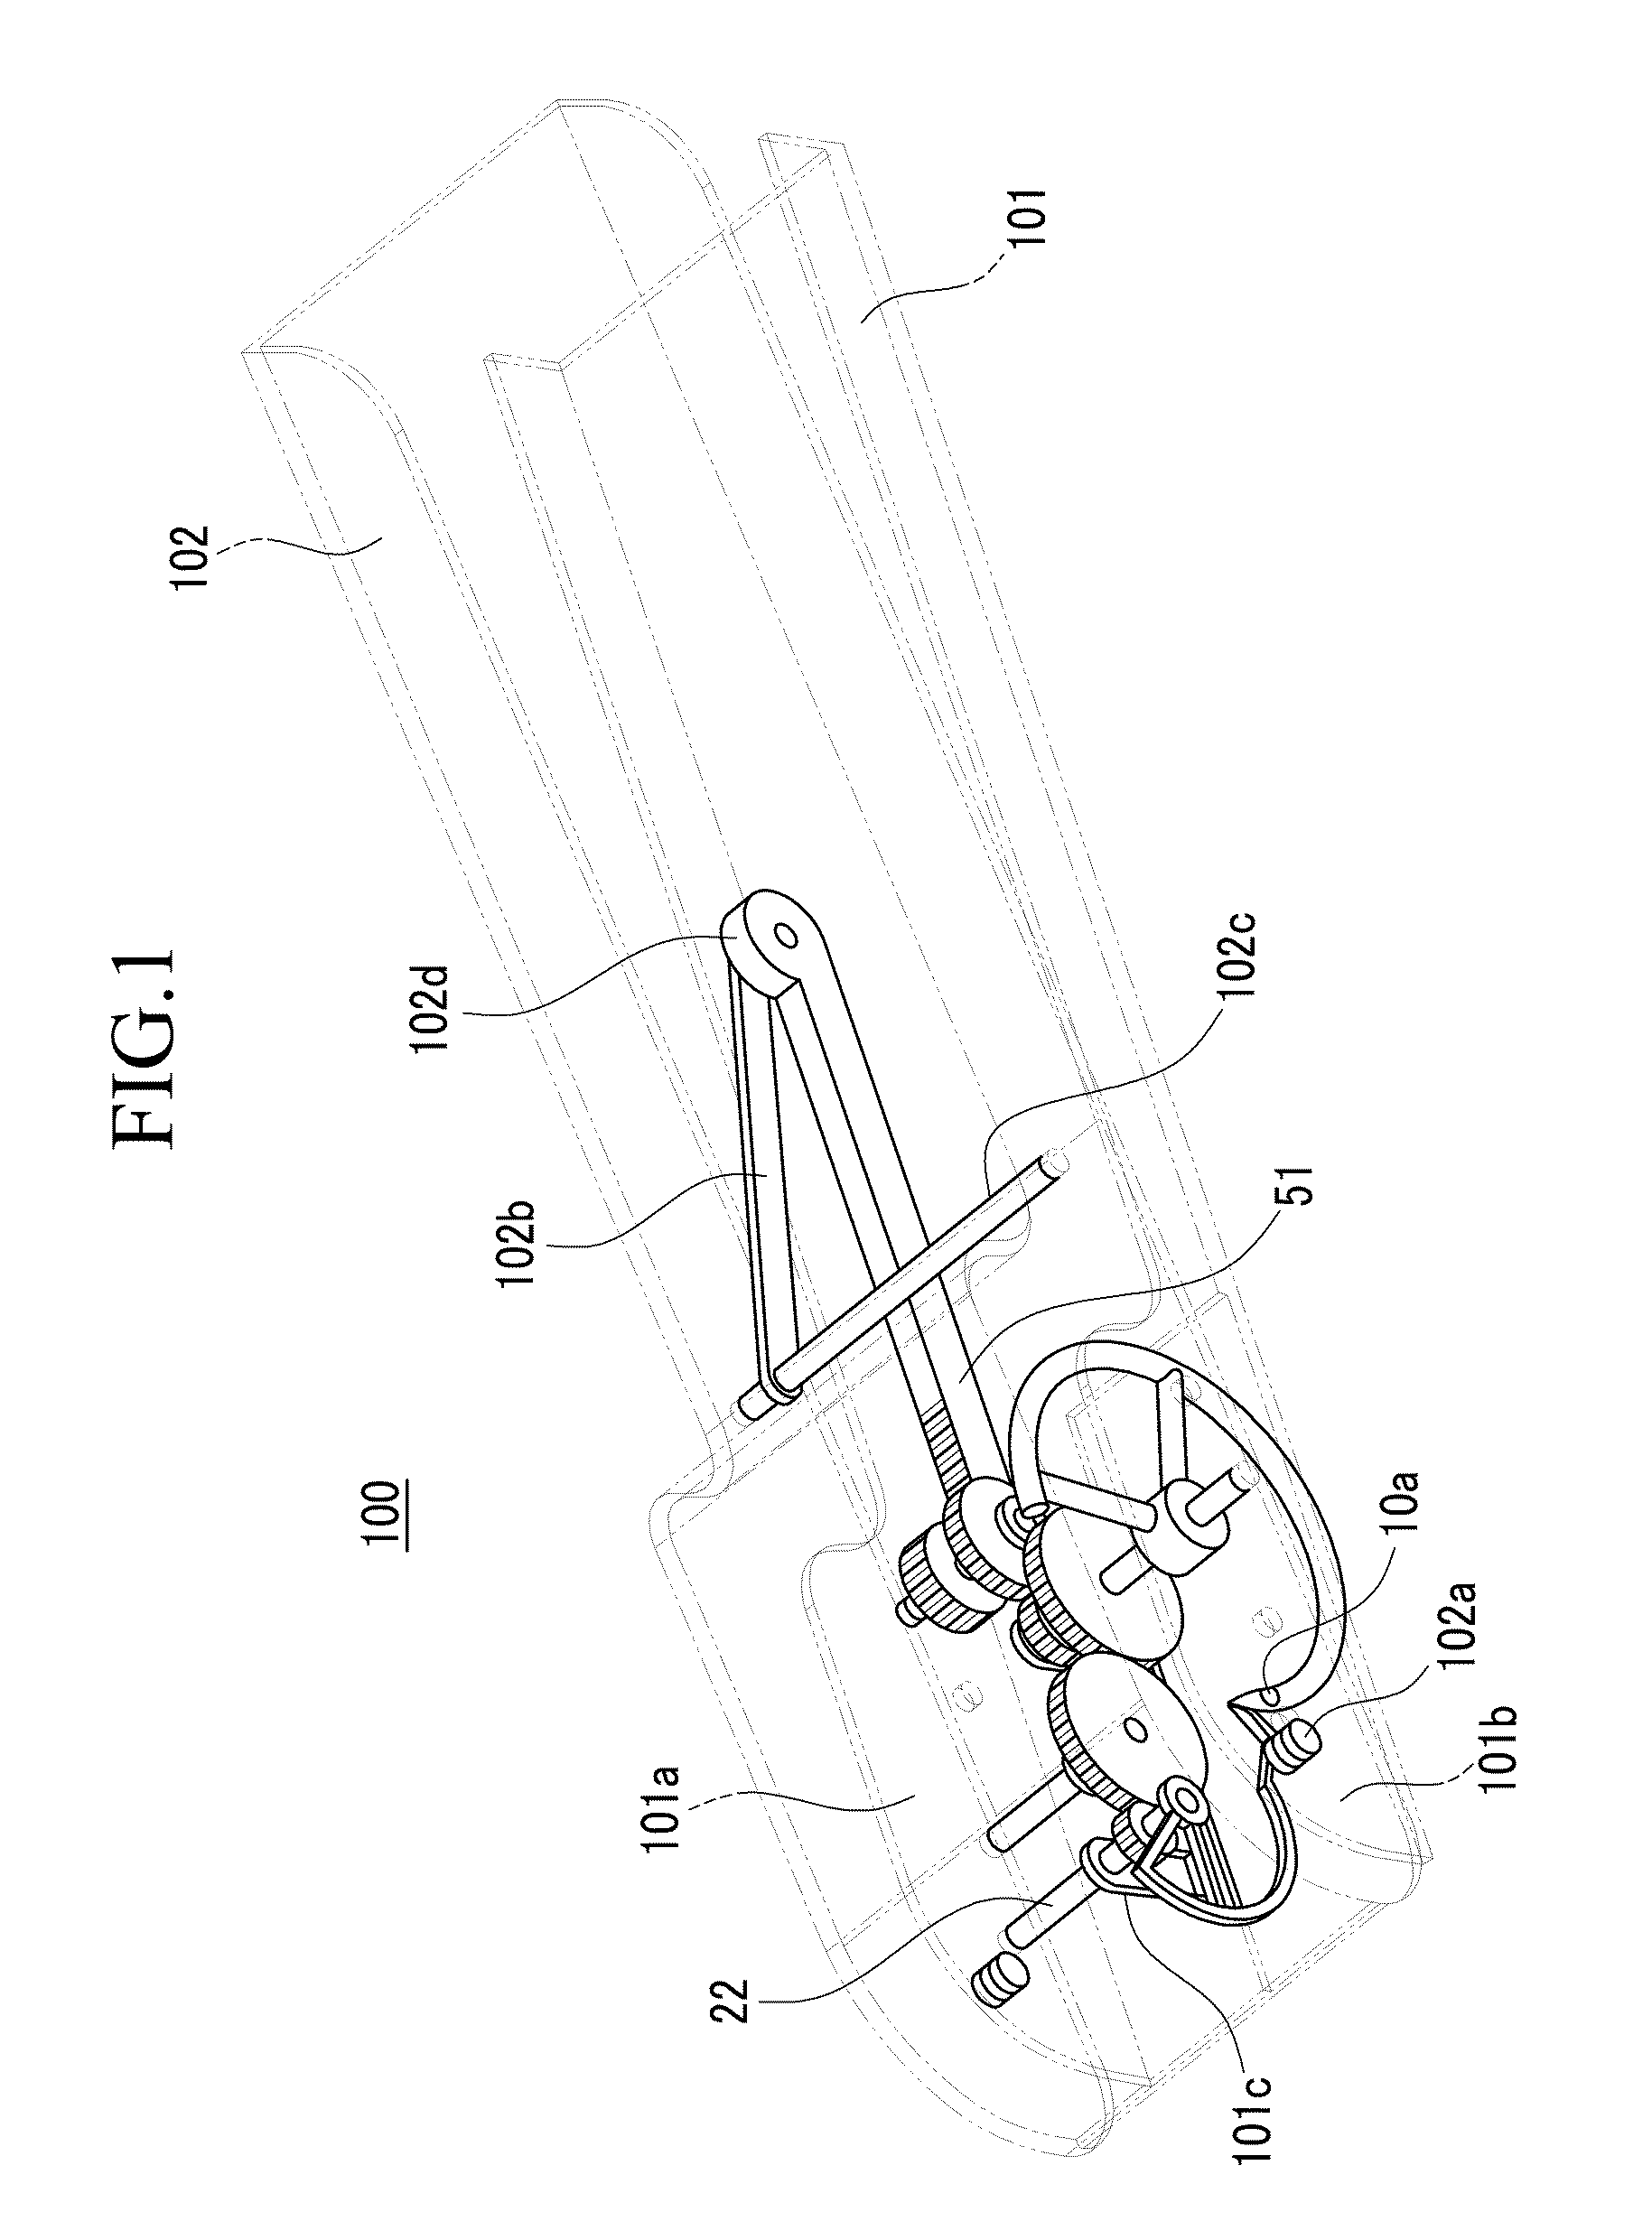 Suture device for surgical operation